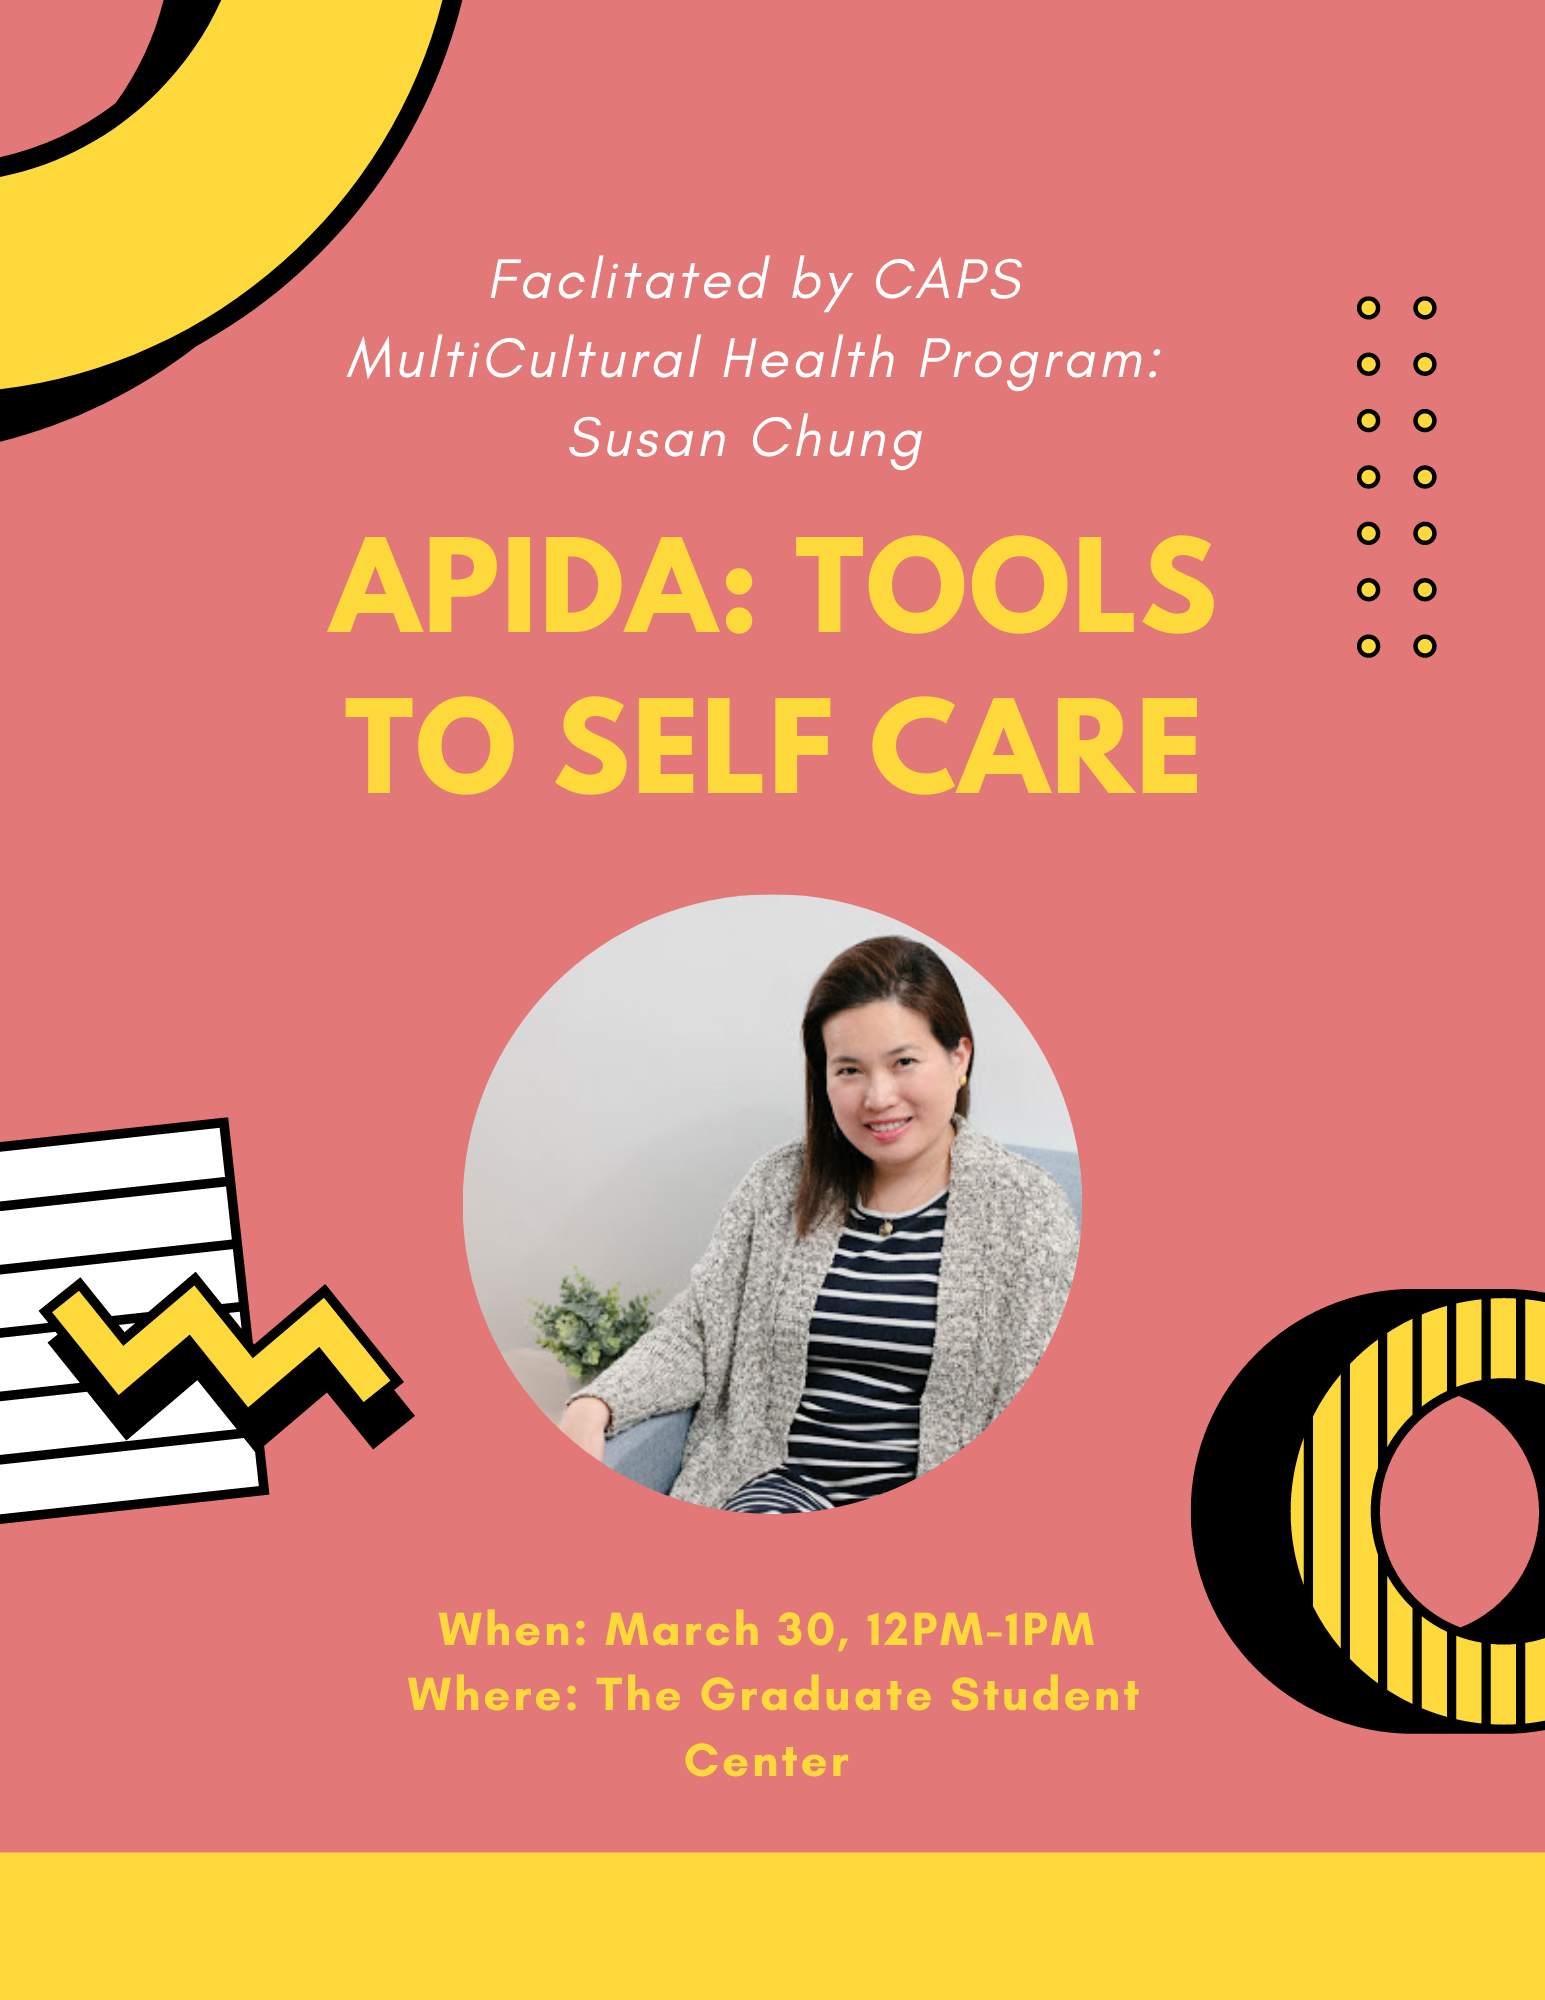 Facilitated by CAPS Multicultural Health Program: Susan Chung. APIDA: Tools to Self Care. When: March 30, 12PM-1PM. Where: The Graduate Student Center. Yellow and white text on a peach background. An image of Susan Chung in the center of the flyer.